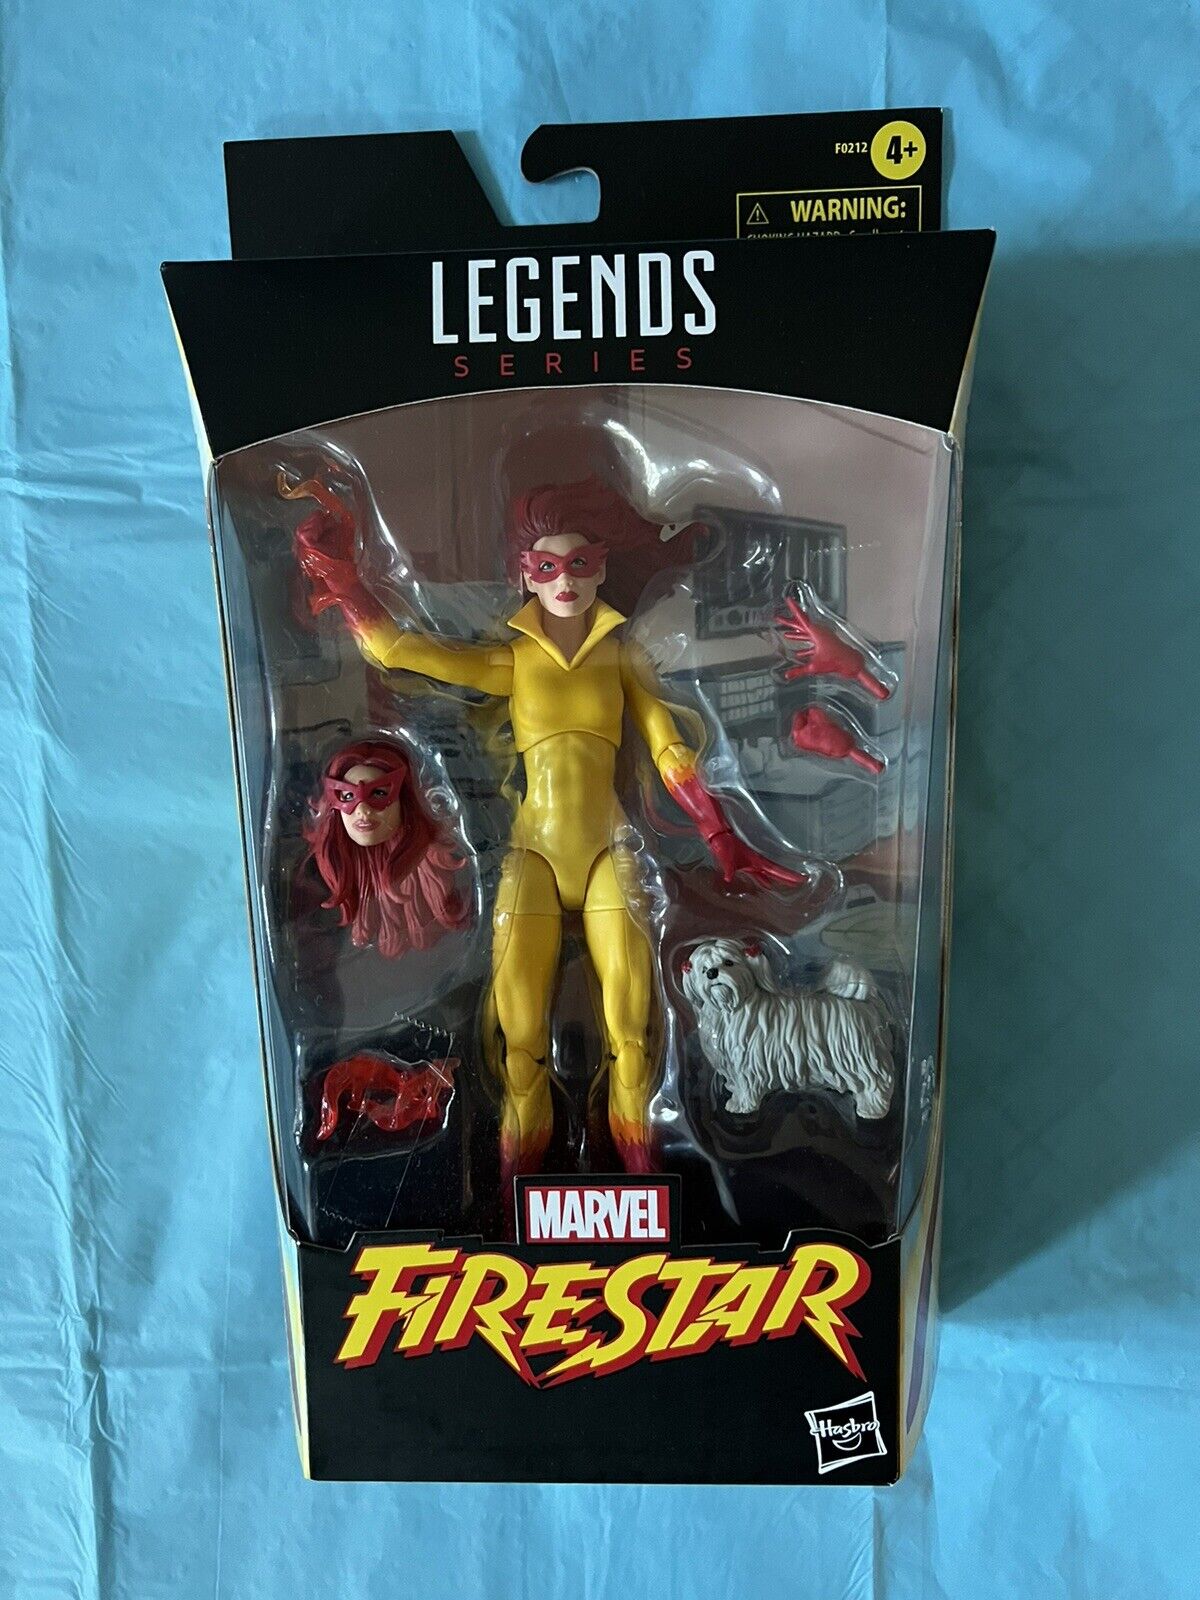 2021 Marvel Legends Firestar with Ms. Lion 6-inch Action Figure by Hasbro